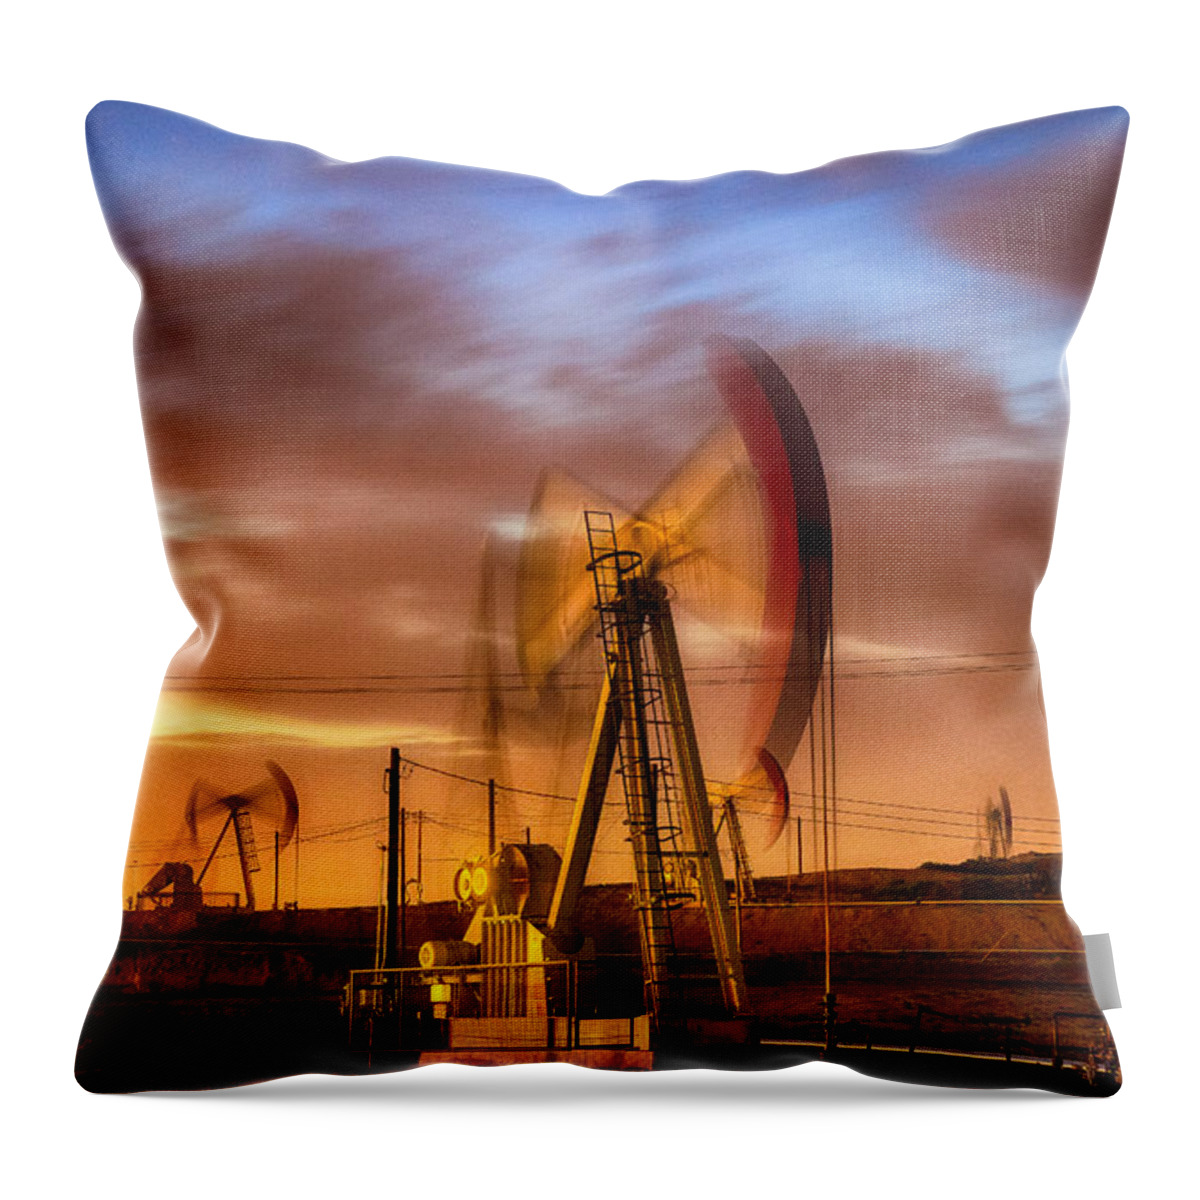 Oil Rig Throw Pillow featuring the photograph Oil Rig 1 by Anthony Michael Bonafede